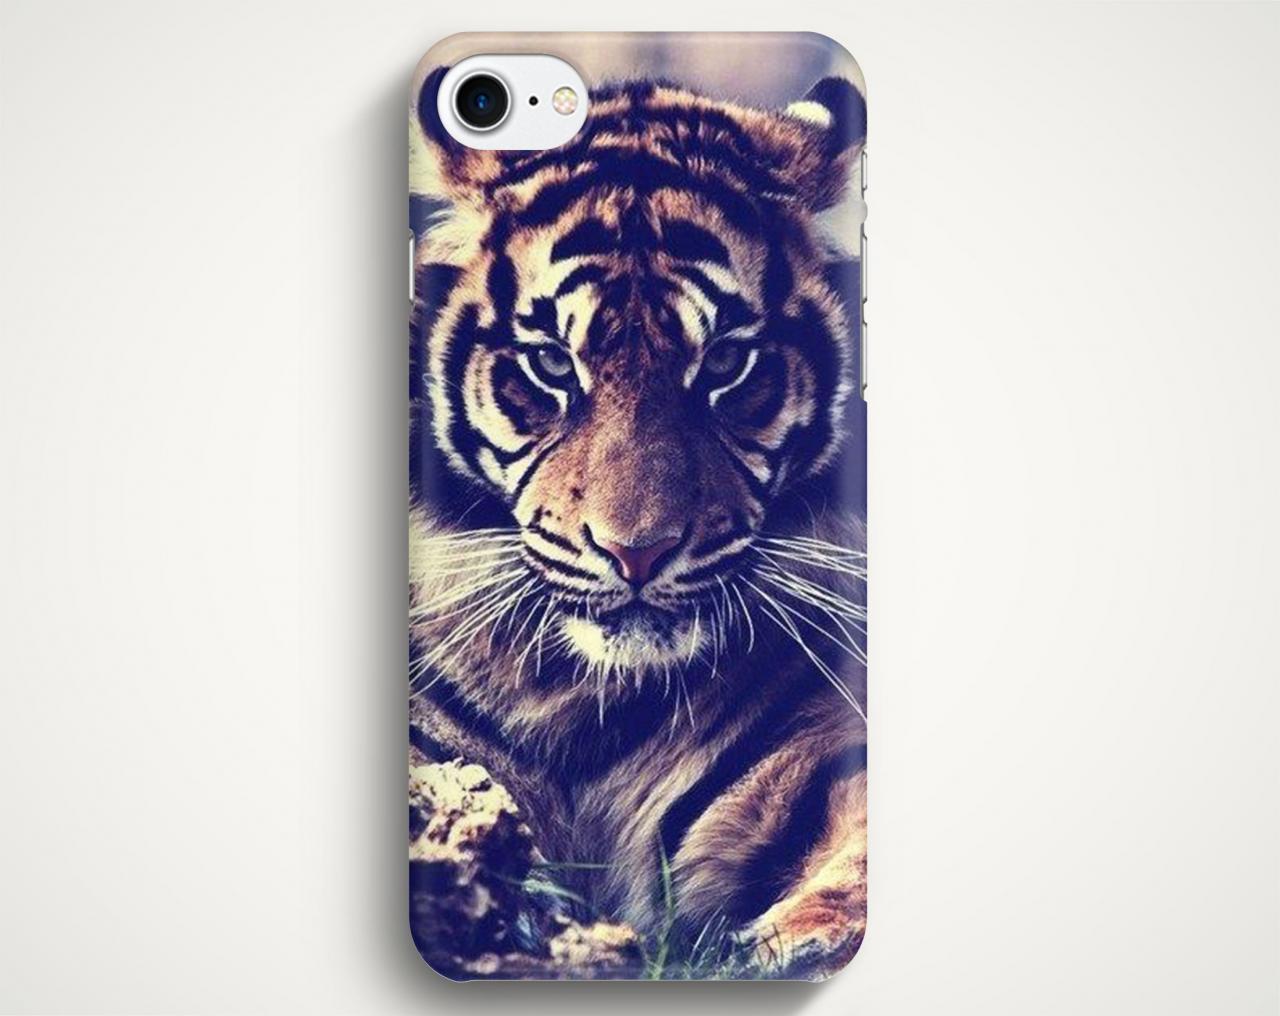 Tiger Case For Iphone 7 Iphone 7 Plus Samsung Galaxy S8 Galaxy S7 Galaxy A3 Galaxy A5 Galaxy A7 Lg G6 Lg G5 Htc 10